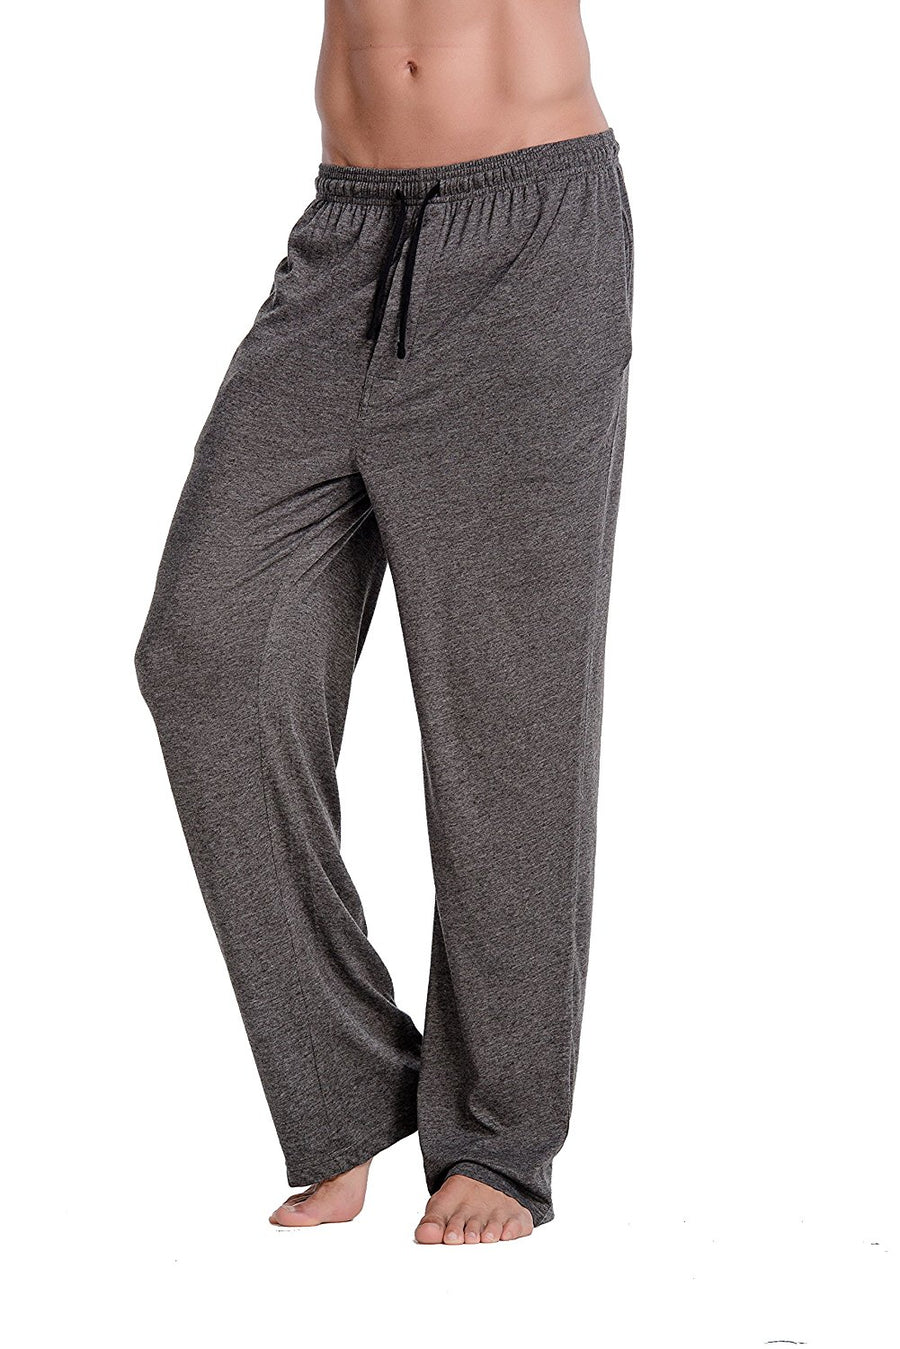 Men's Knit Cargo Joggers - Original Use™ Quill Gray Xs : Target